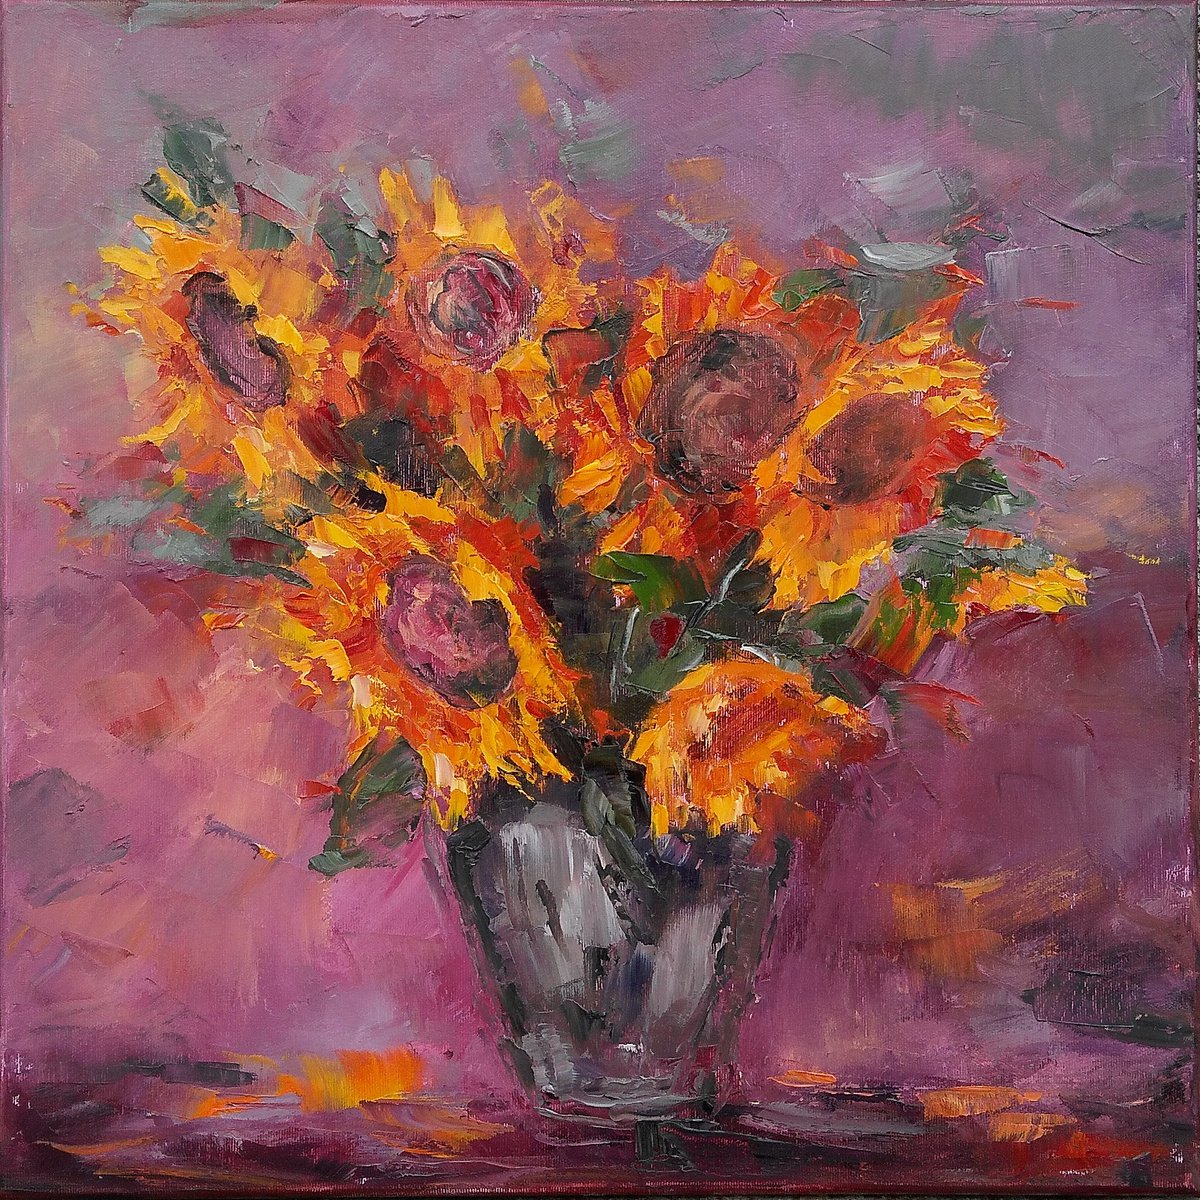 FEELS LIKE SUNSET, 50x50cm, sunflowers oil floral still life painting by Emilia Milcheva